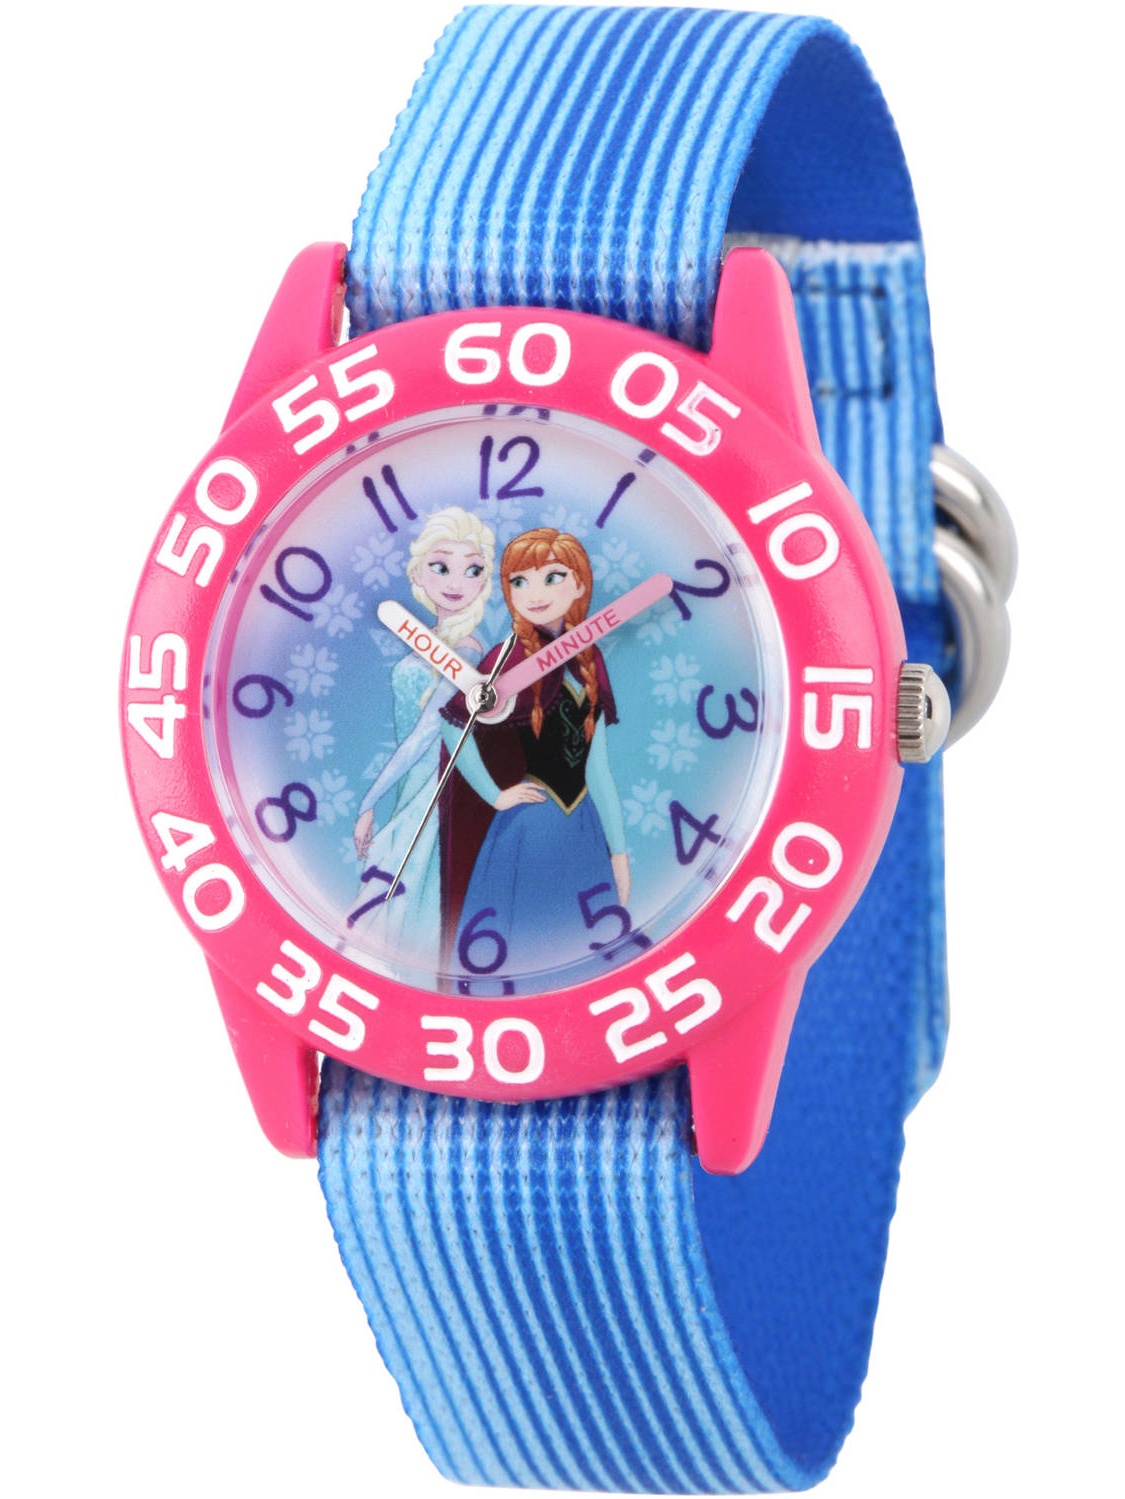 Frozen Elsa and Anna Girls' Pink Plastic Time Teacher Watch, Blue Stripe Stretchy Nylon Strap - image 1 of 6